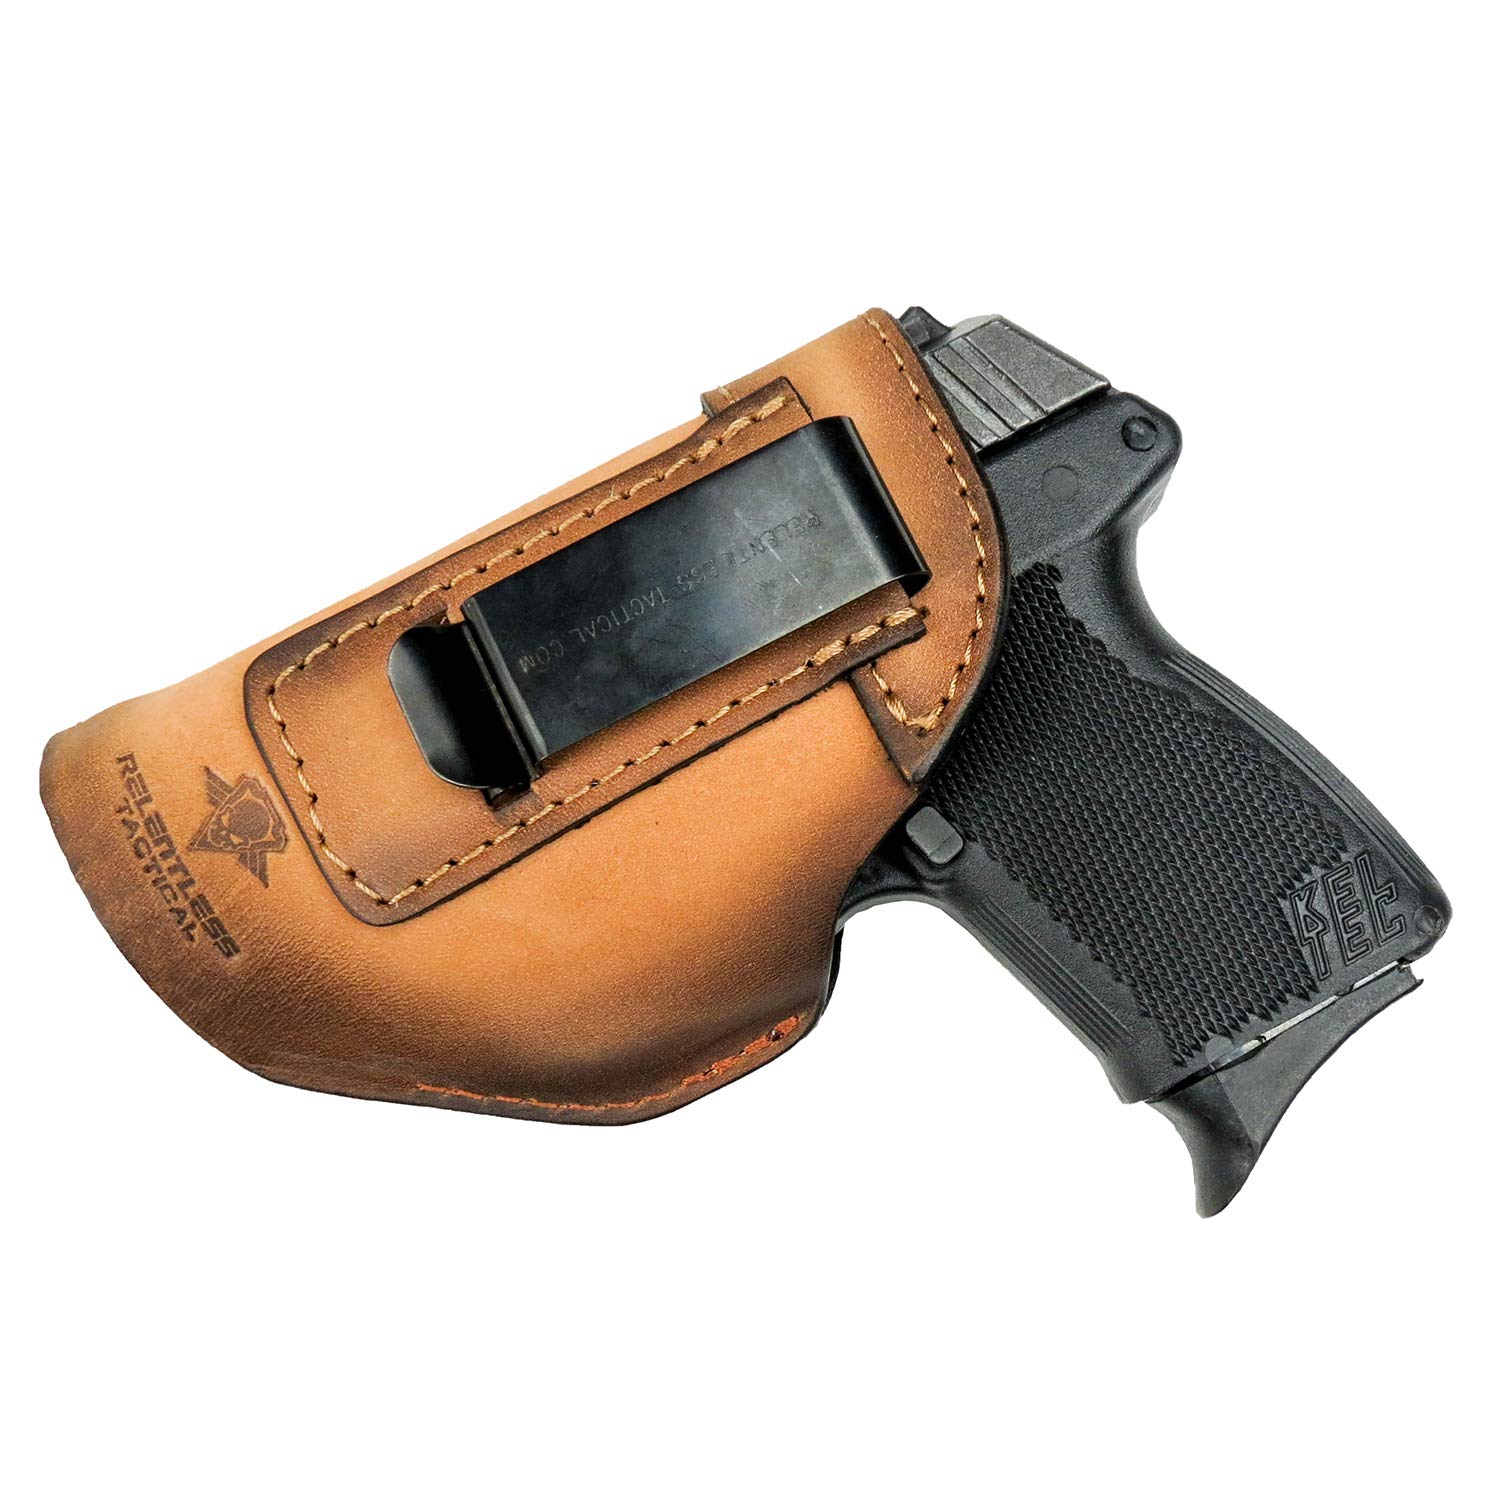 Relentless Tactical The Defender Leather IWB Holster - Made in USA - Fits glock 42 Sig P365 Ruger Lc9, Lc9s Kahr cM9, MK9, P9 Sp